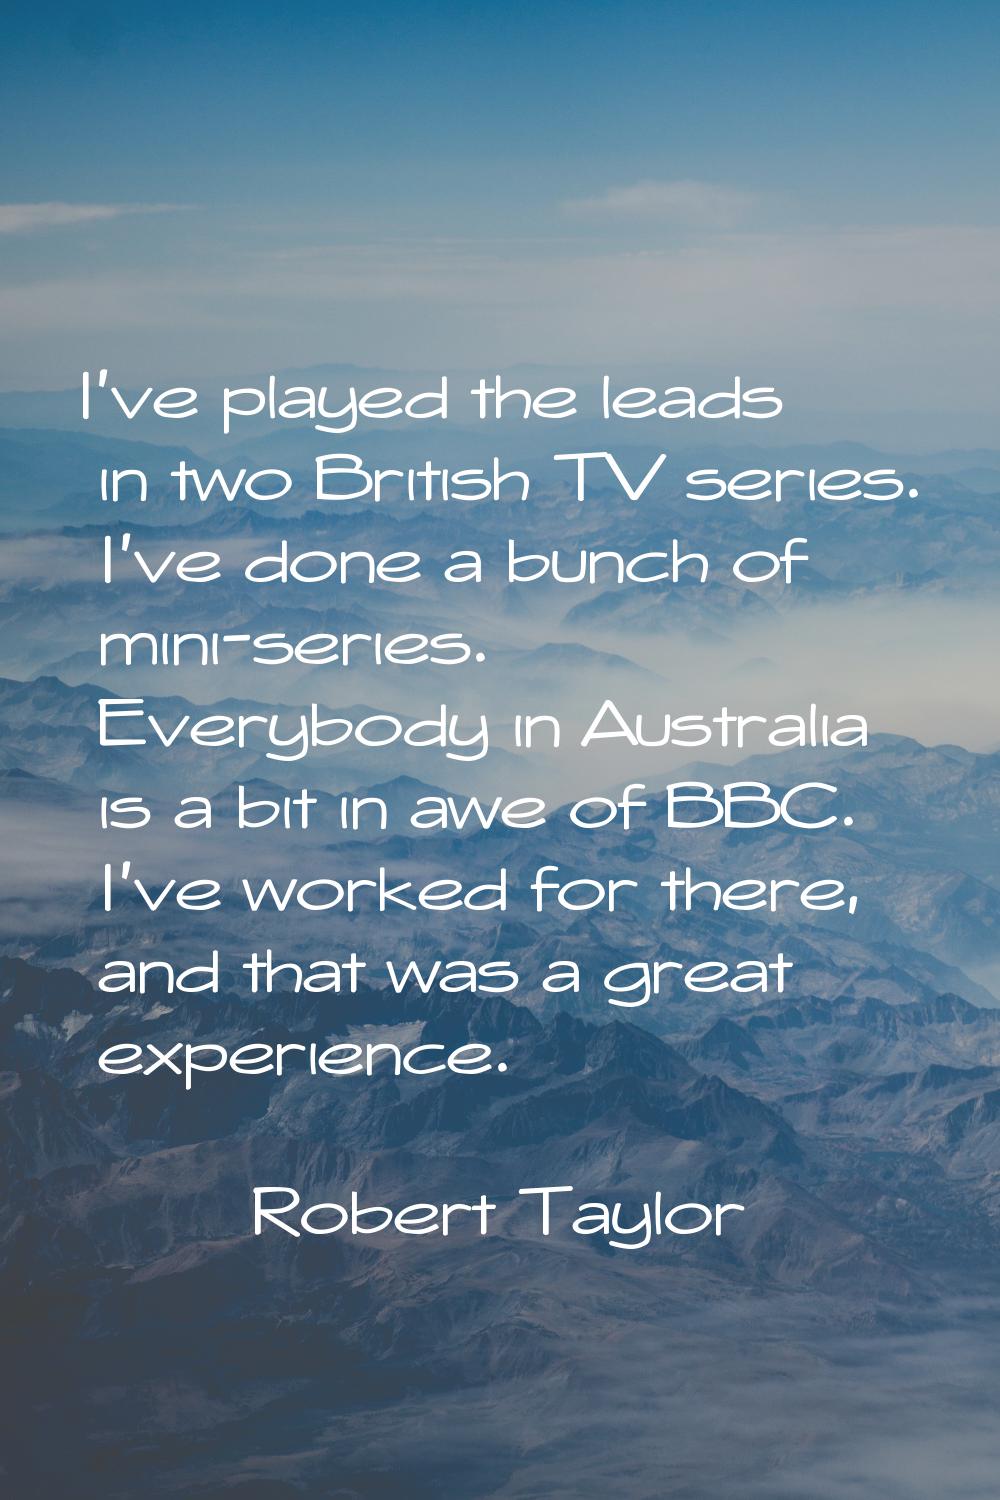 I've played the leads in two British TV series. I've done a bunch of mini-series. Everybody in Aust